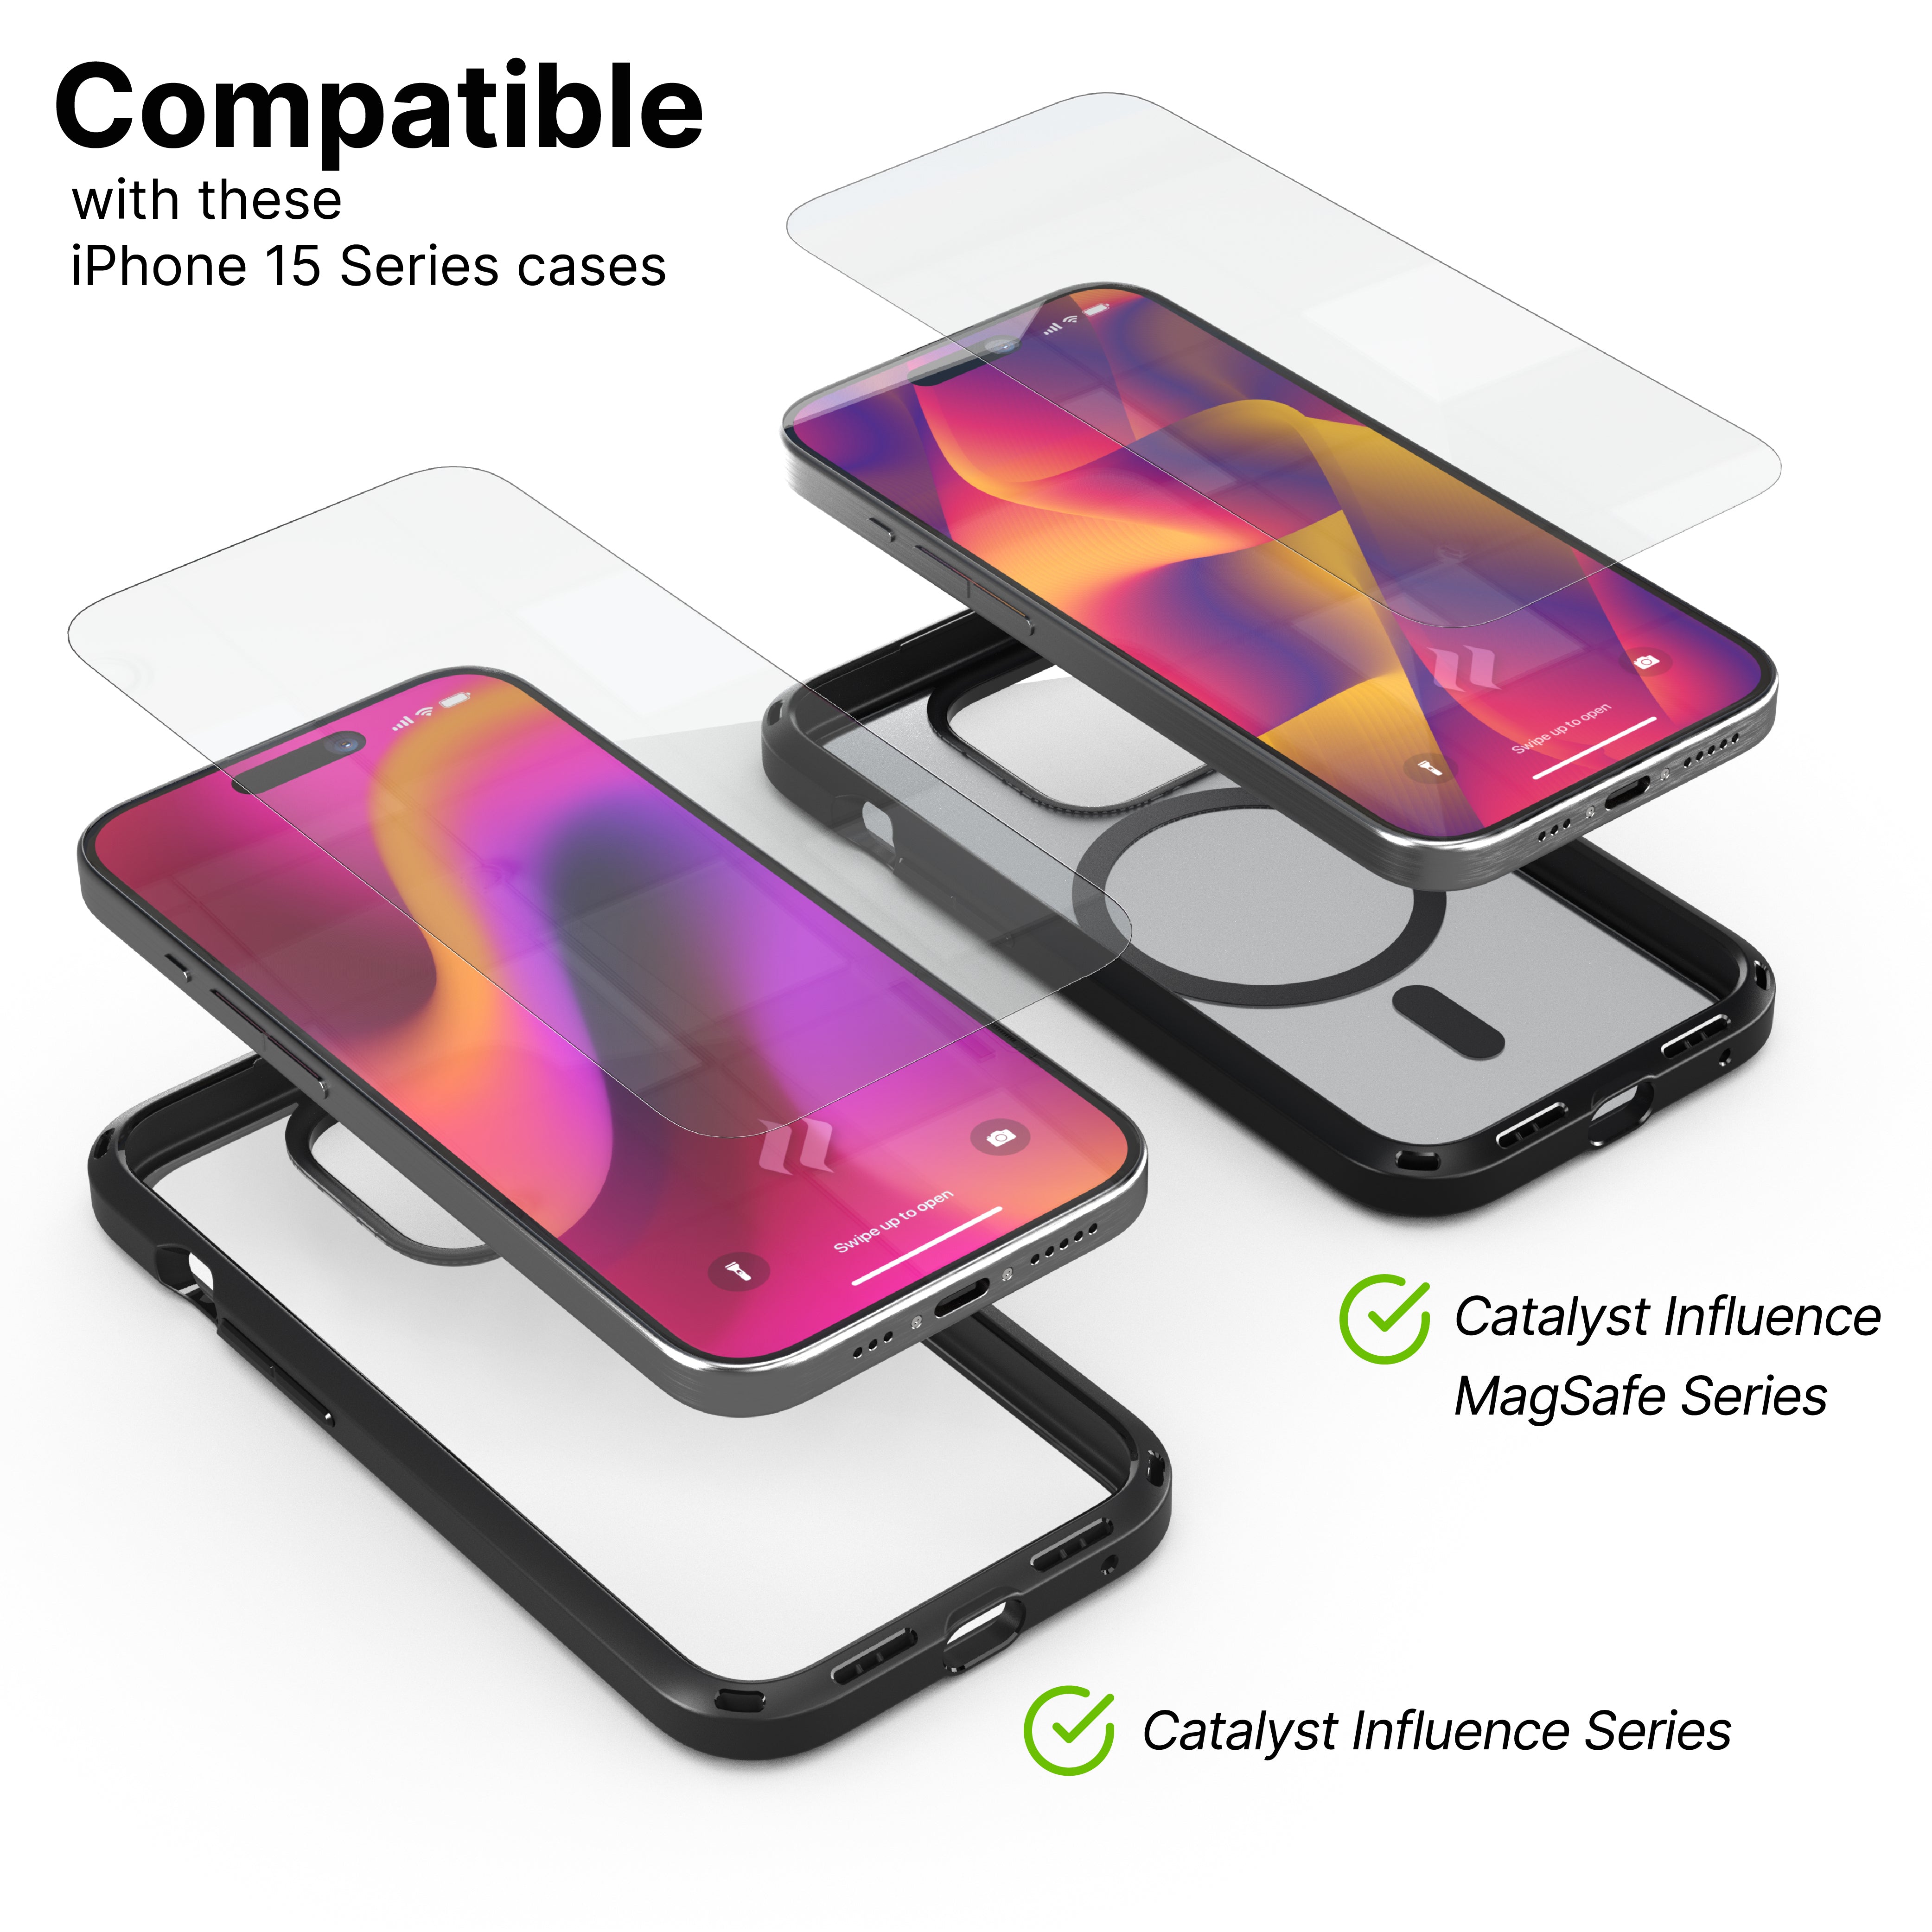 https://www.catalystcase.com/cdn/shop/files/catalyst-screen-protector-for-iphone-15-series-compatible-with-influence-case-magsafe-series-and-influence-series.jpg?v=1704202600&width=4167